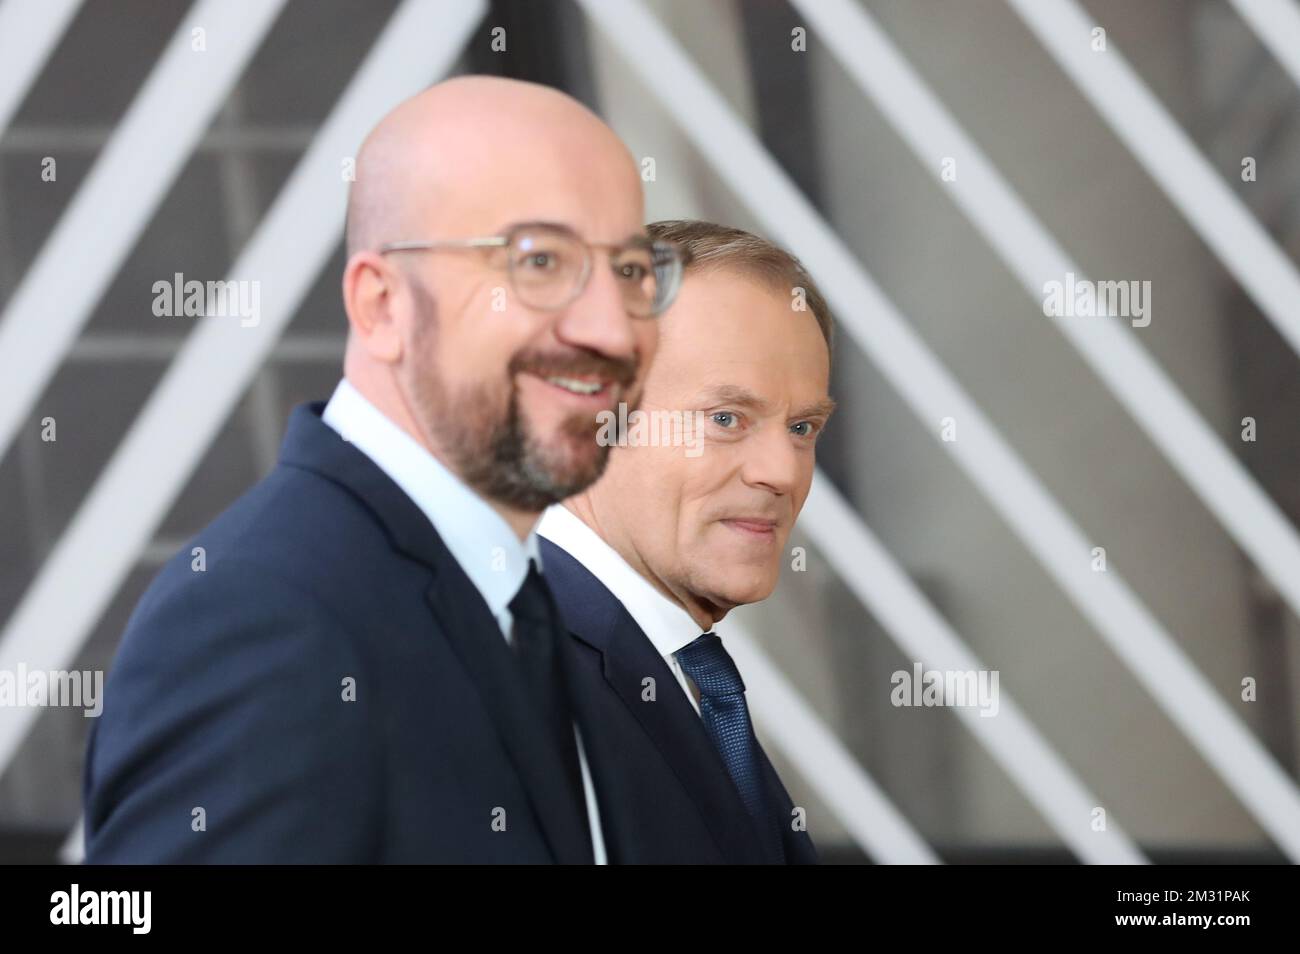 Newly appointed European Council President Charles Michel and European Council President Donald Tusk pictured during the handover between outgoing President Tusk and incoming President Michel, at the European headquarters in Brussels, Friday 29 November 2019. BELGA PHOTO BENOIT DOPPAGNE  Stock Photo